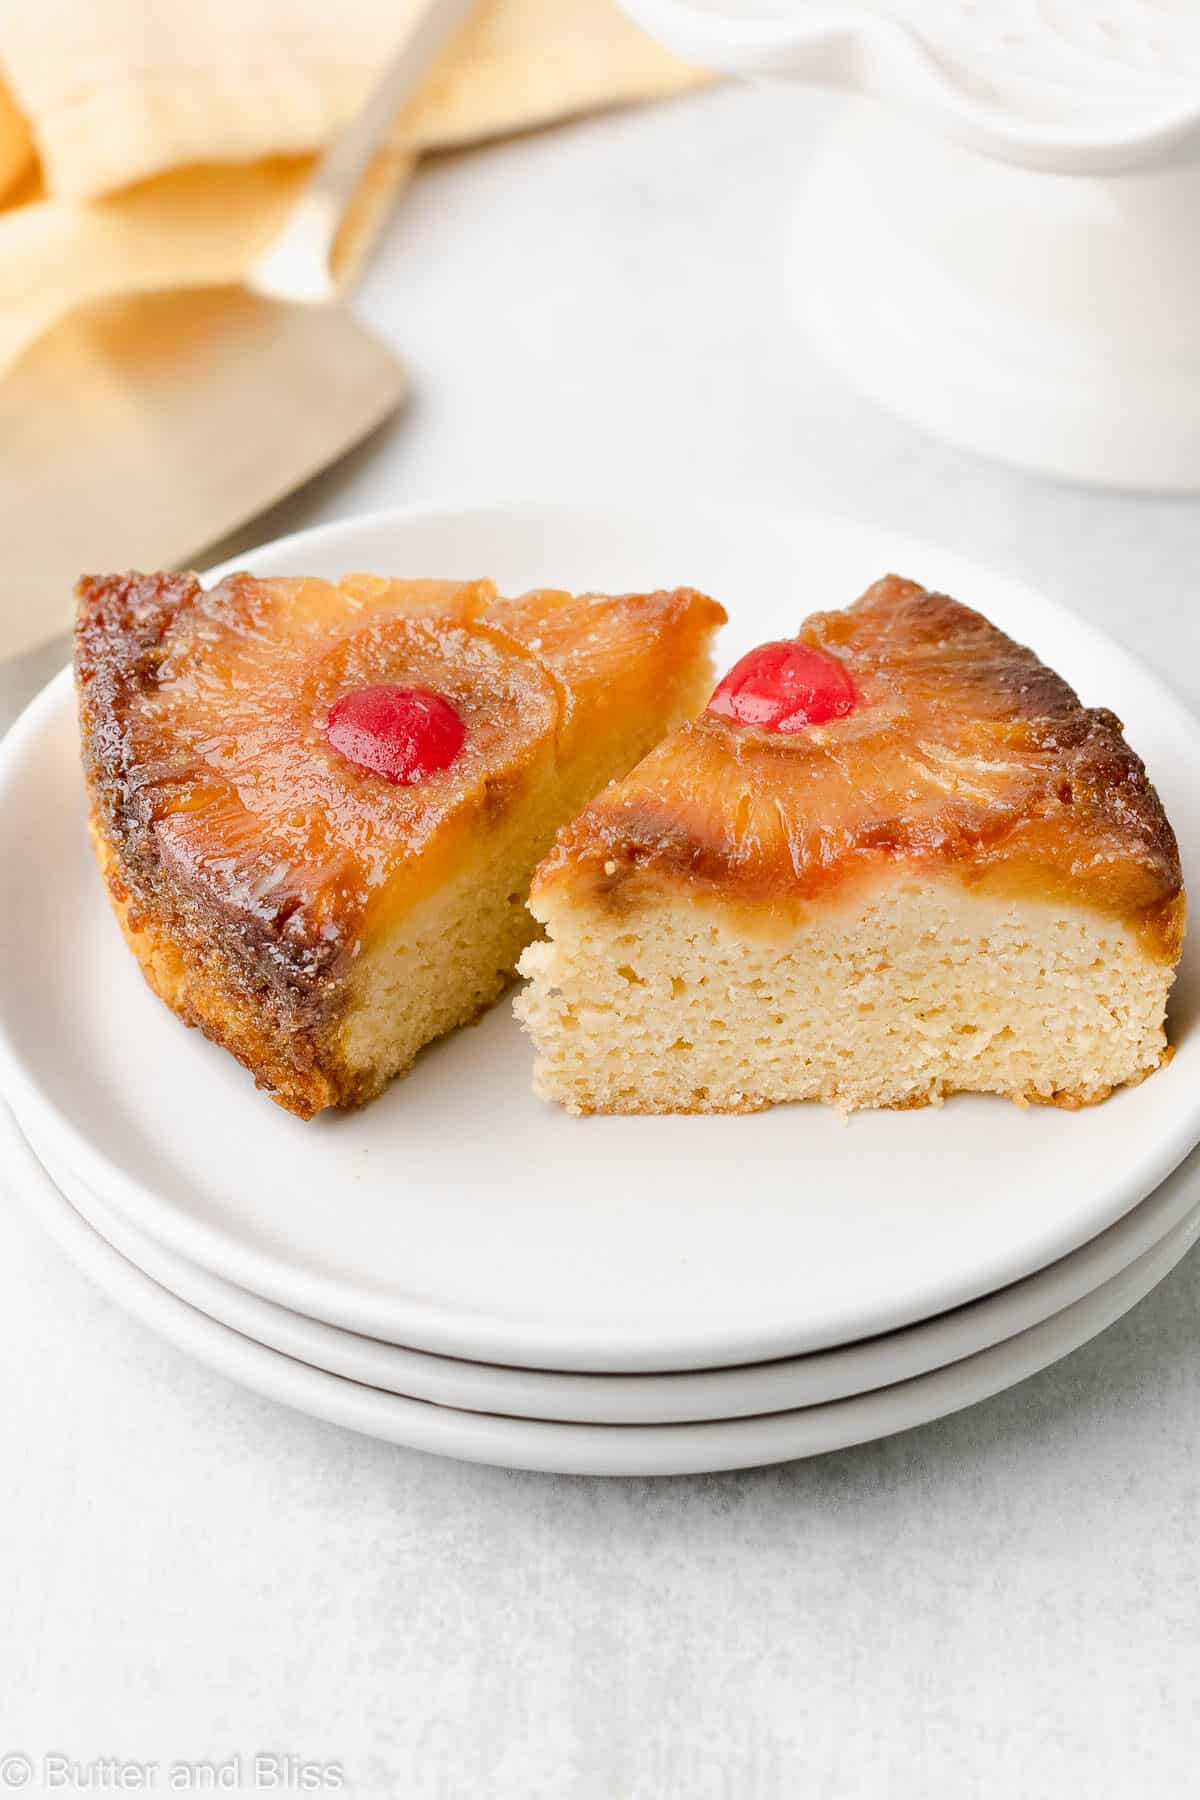 Two slices of pineapple cake on a white plate